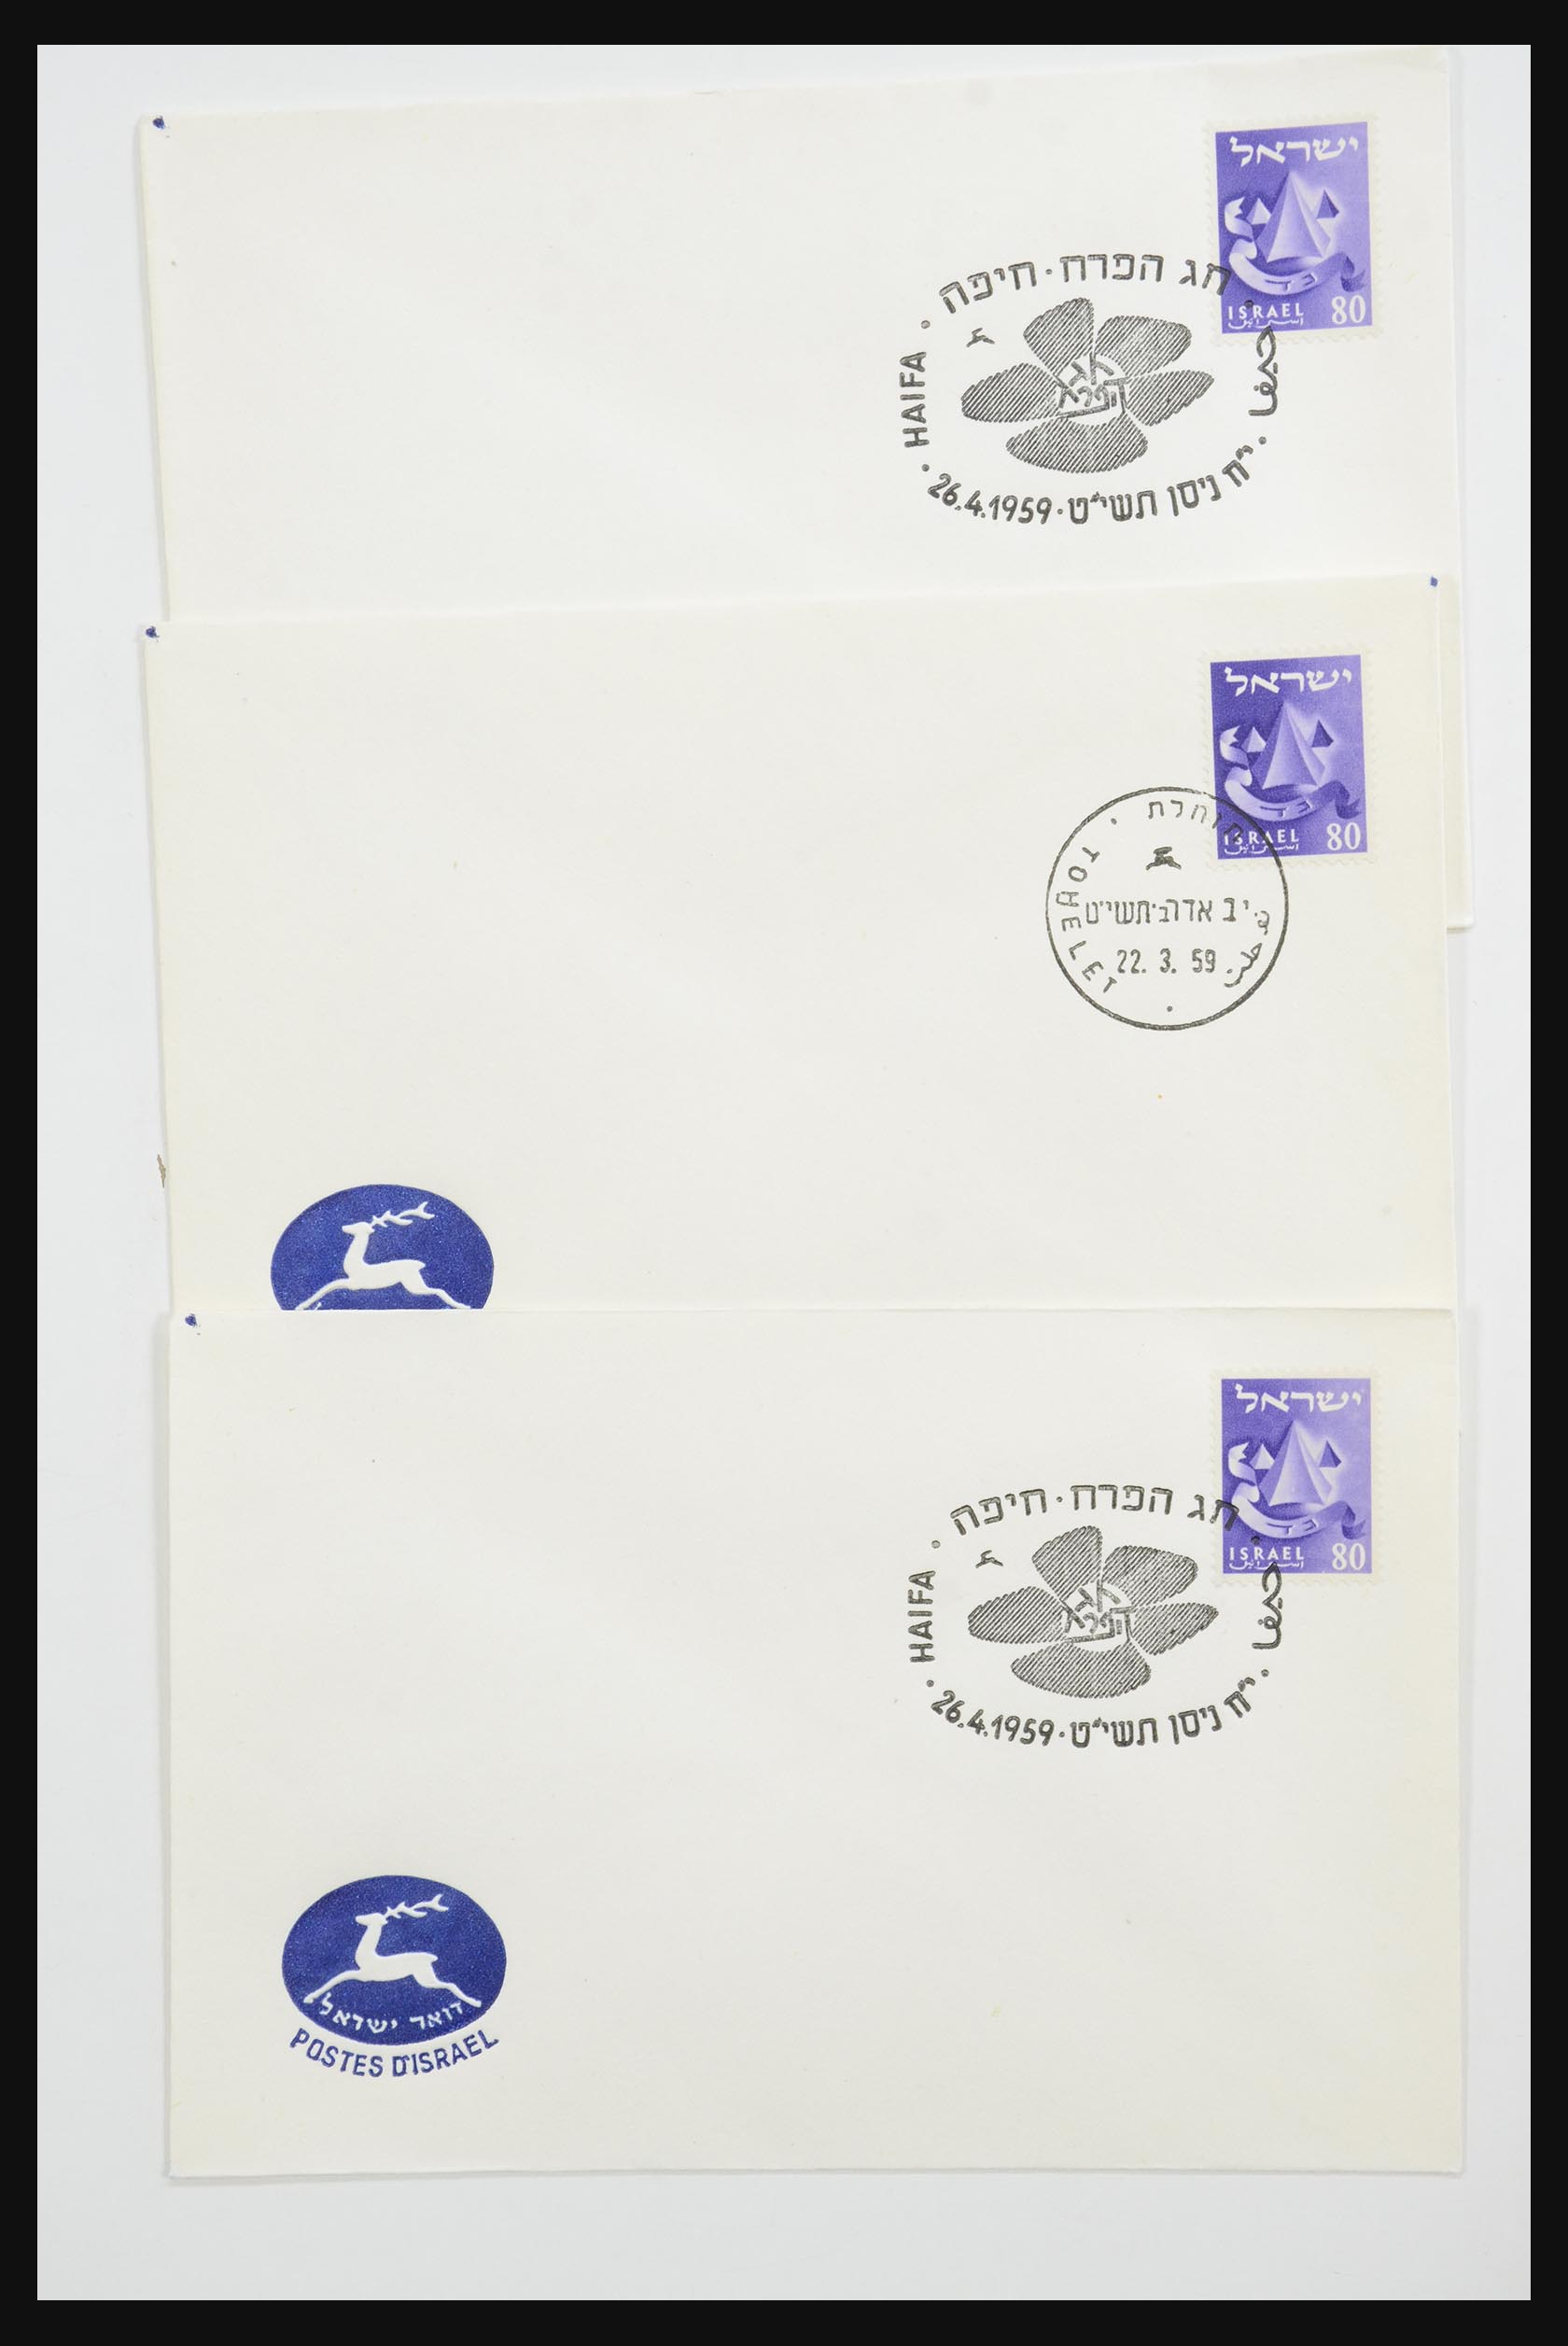 31924 019 - 31924 Israel first day cover collection 1957-2003.